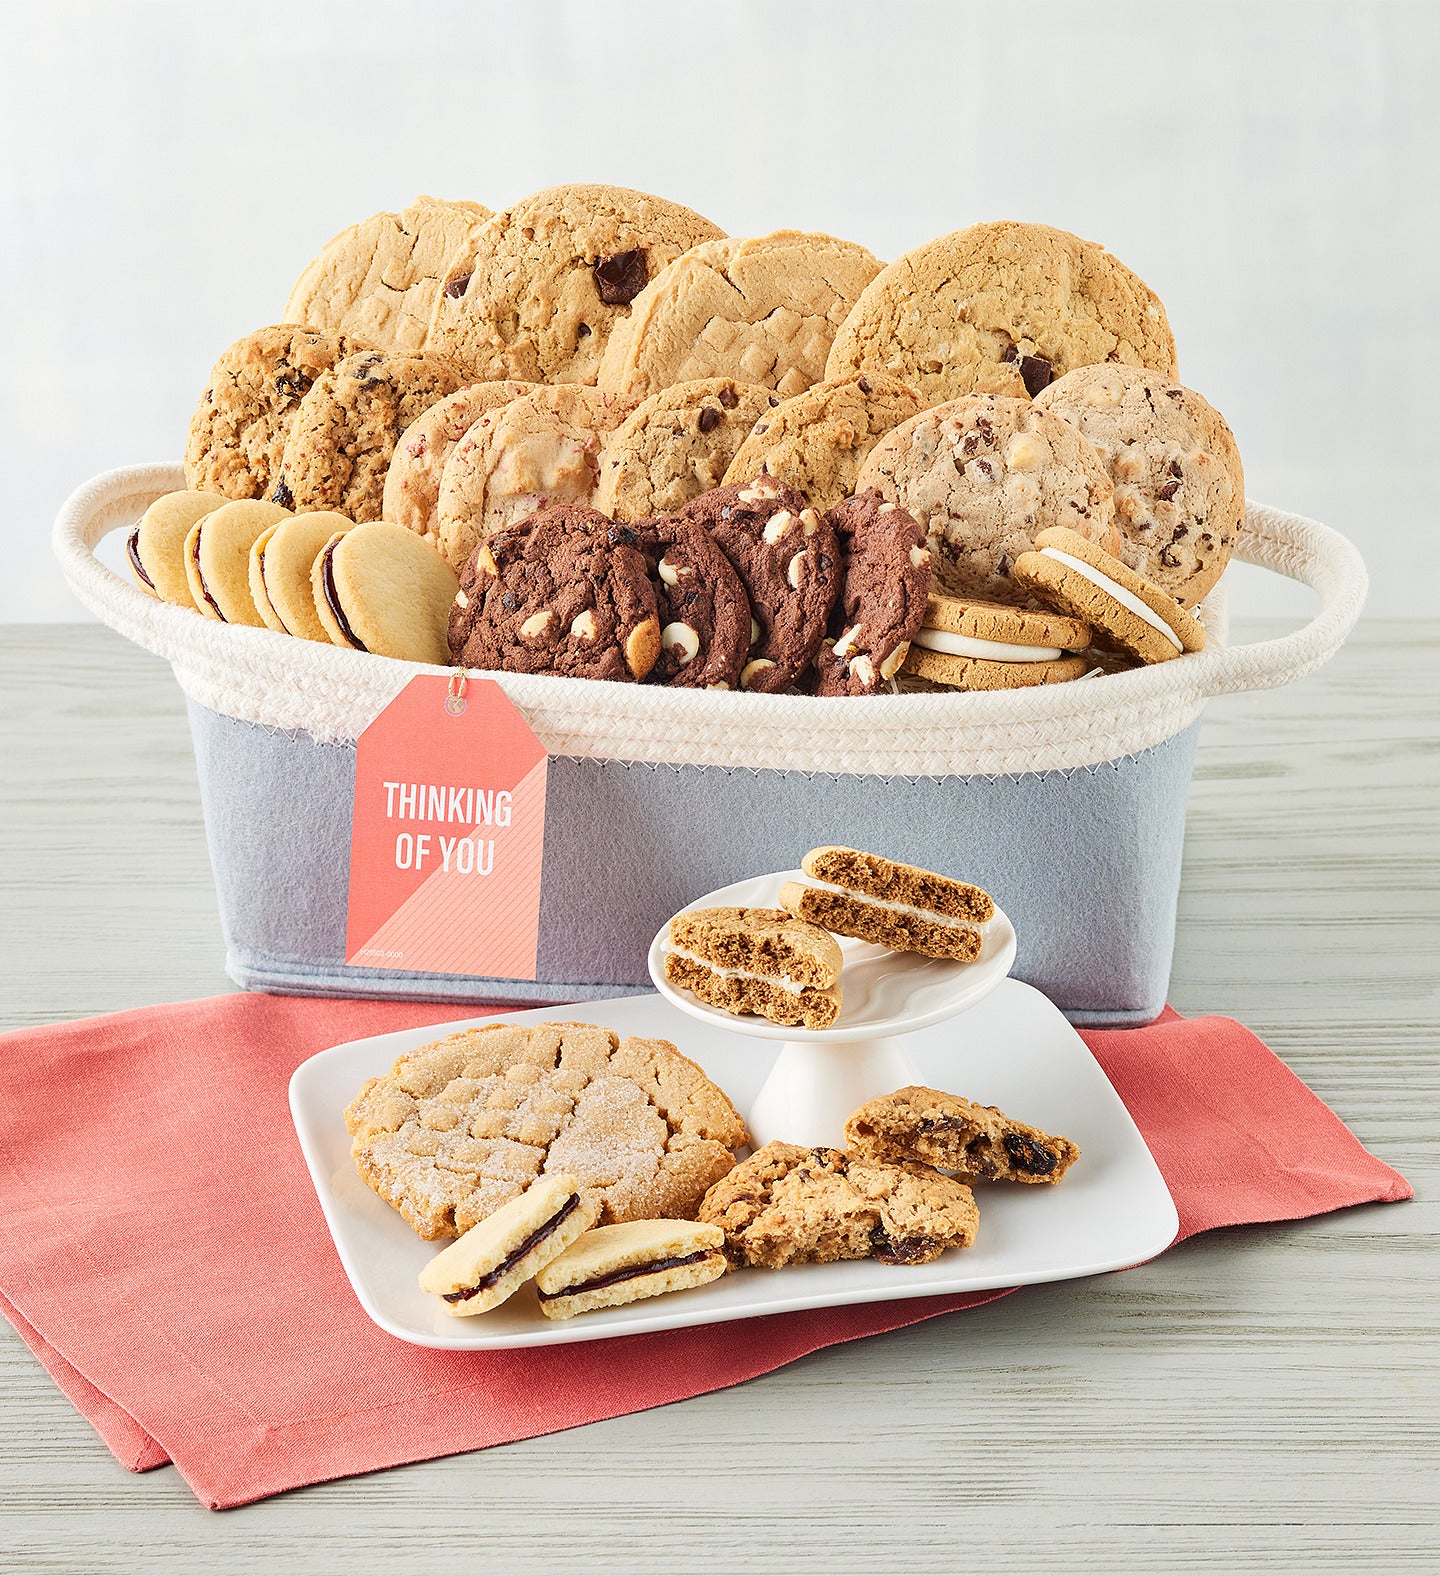 How to Make a Cookie Baking Gift Basket